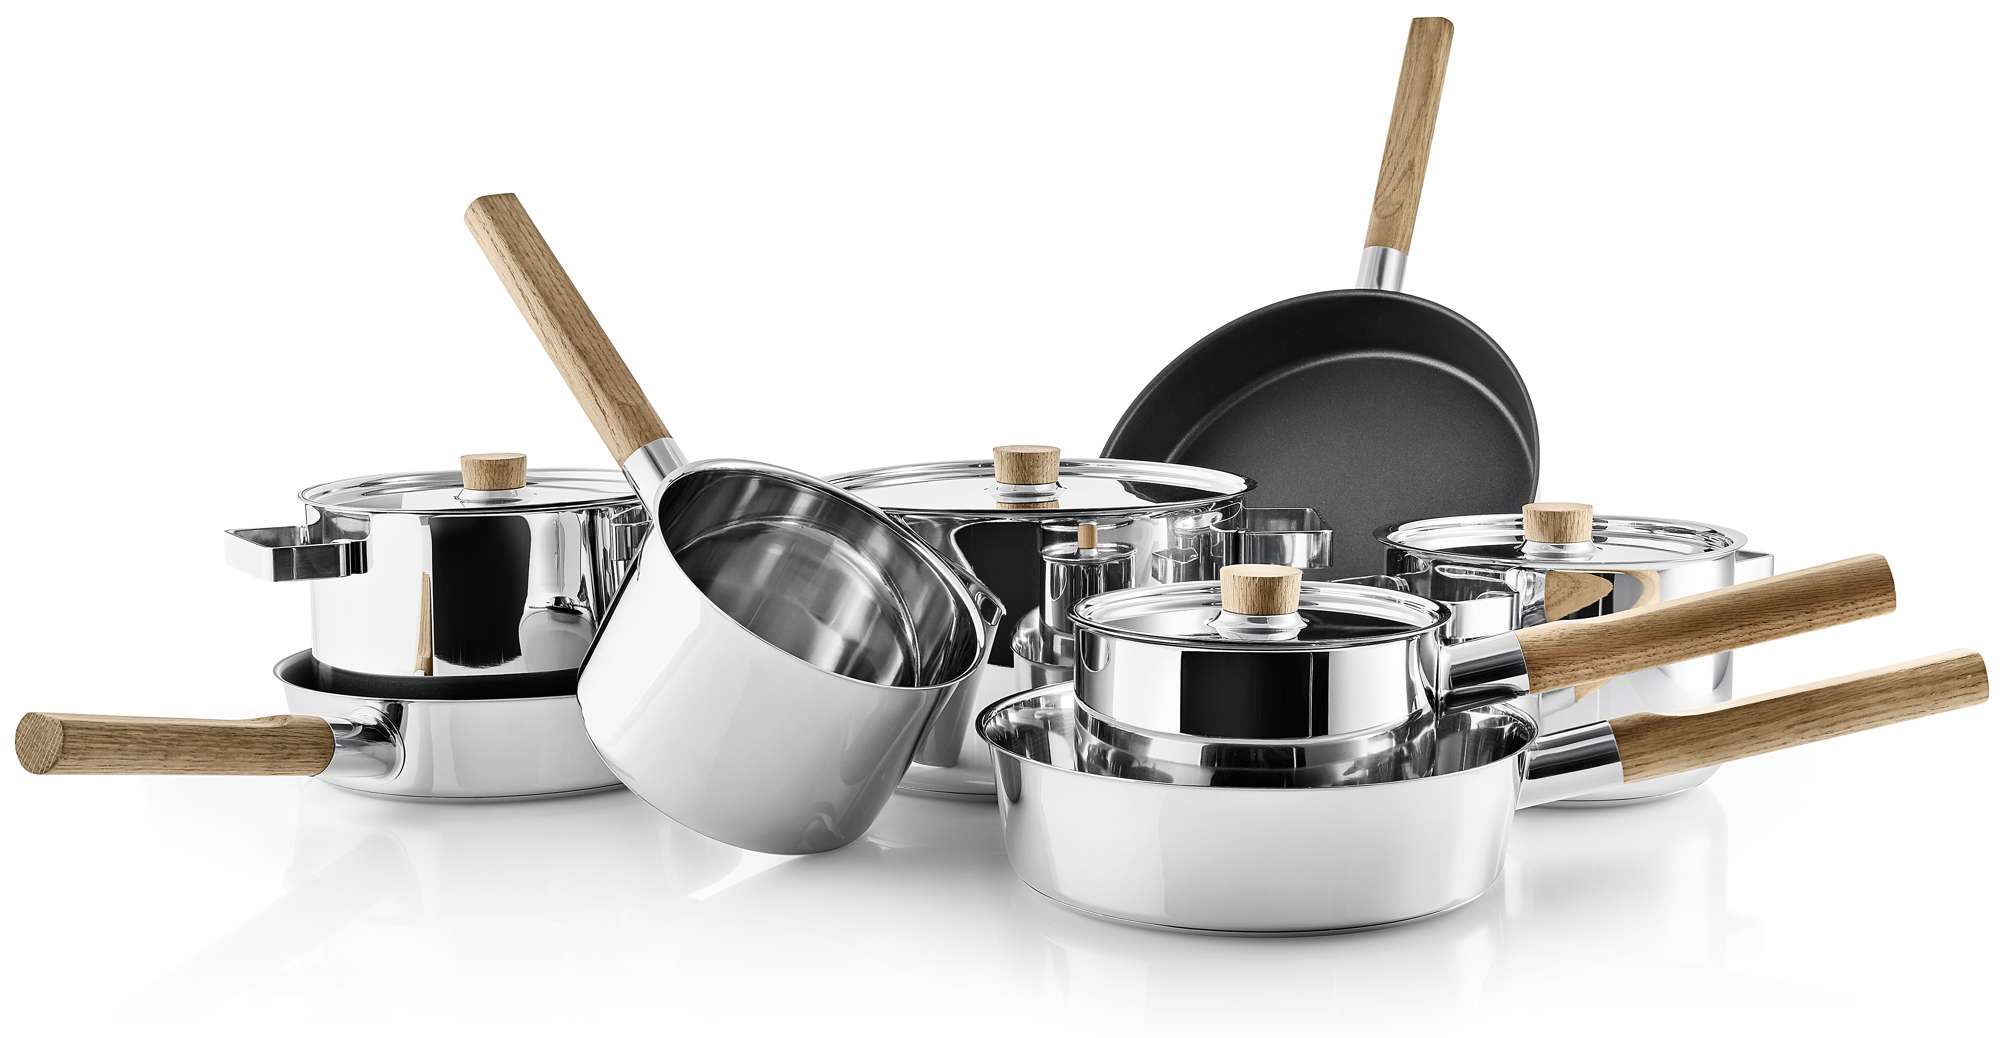 https://www.evasolo.com/%2FFiles%2FImages%2FPlytix%2FLifestyle_Photo_1%2FNordic_Kitchen_Stainless_steel_collection_HIGH.jpg